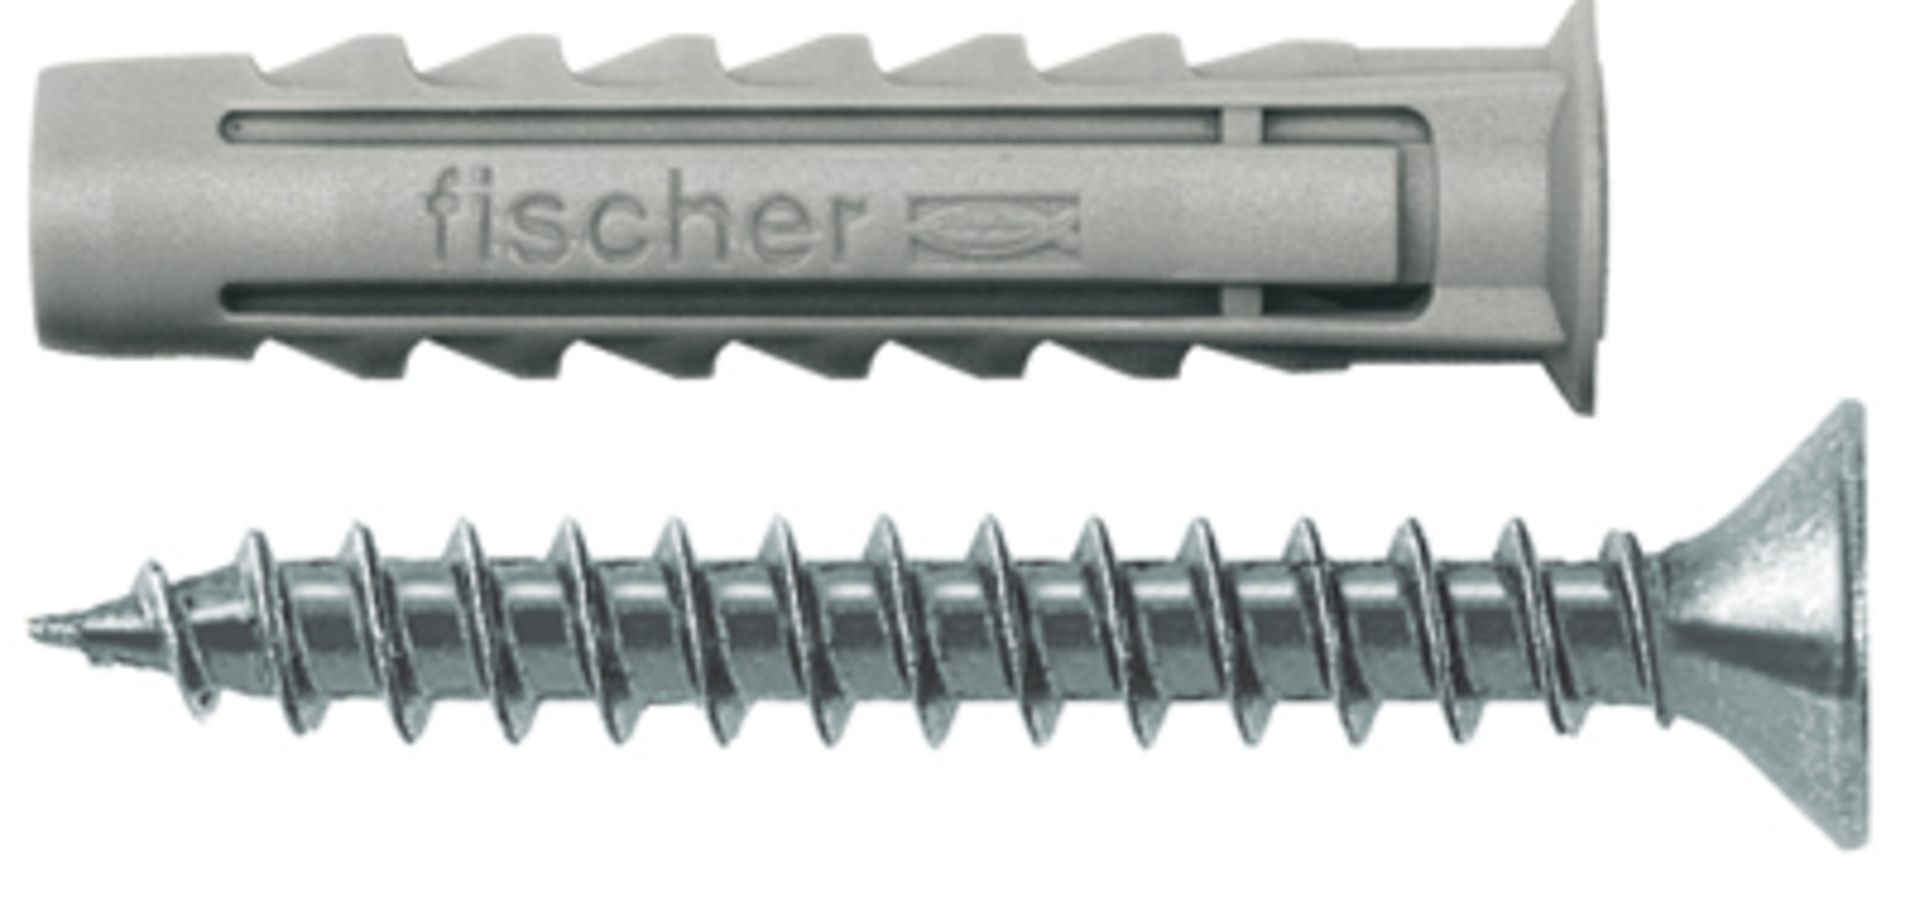 V Two Packs Fischer fixings 8 mm  x  40 mm   20  per  pack high performance wall plug with screws - Image 2 of 2